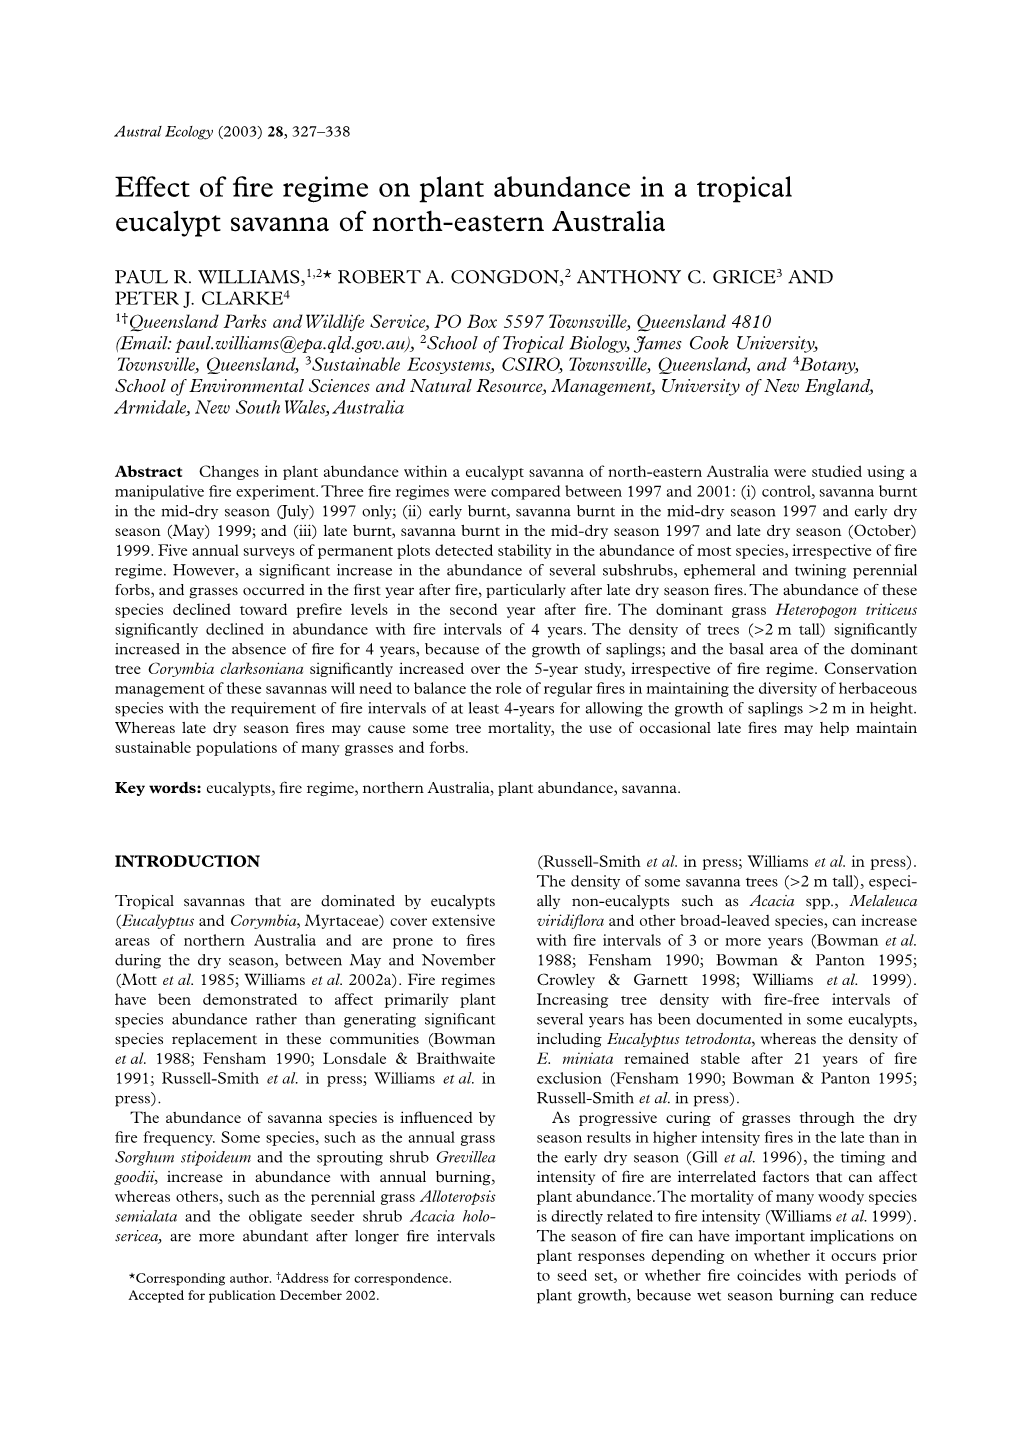 Effect of Fire Regime on Plant Abundance in a Tropical Eucalypt